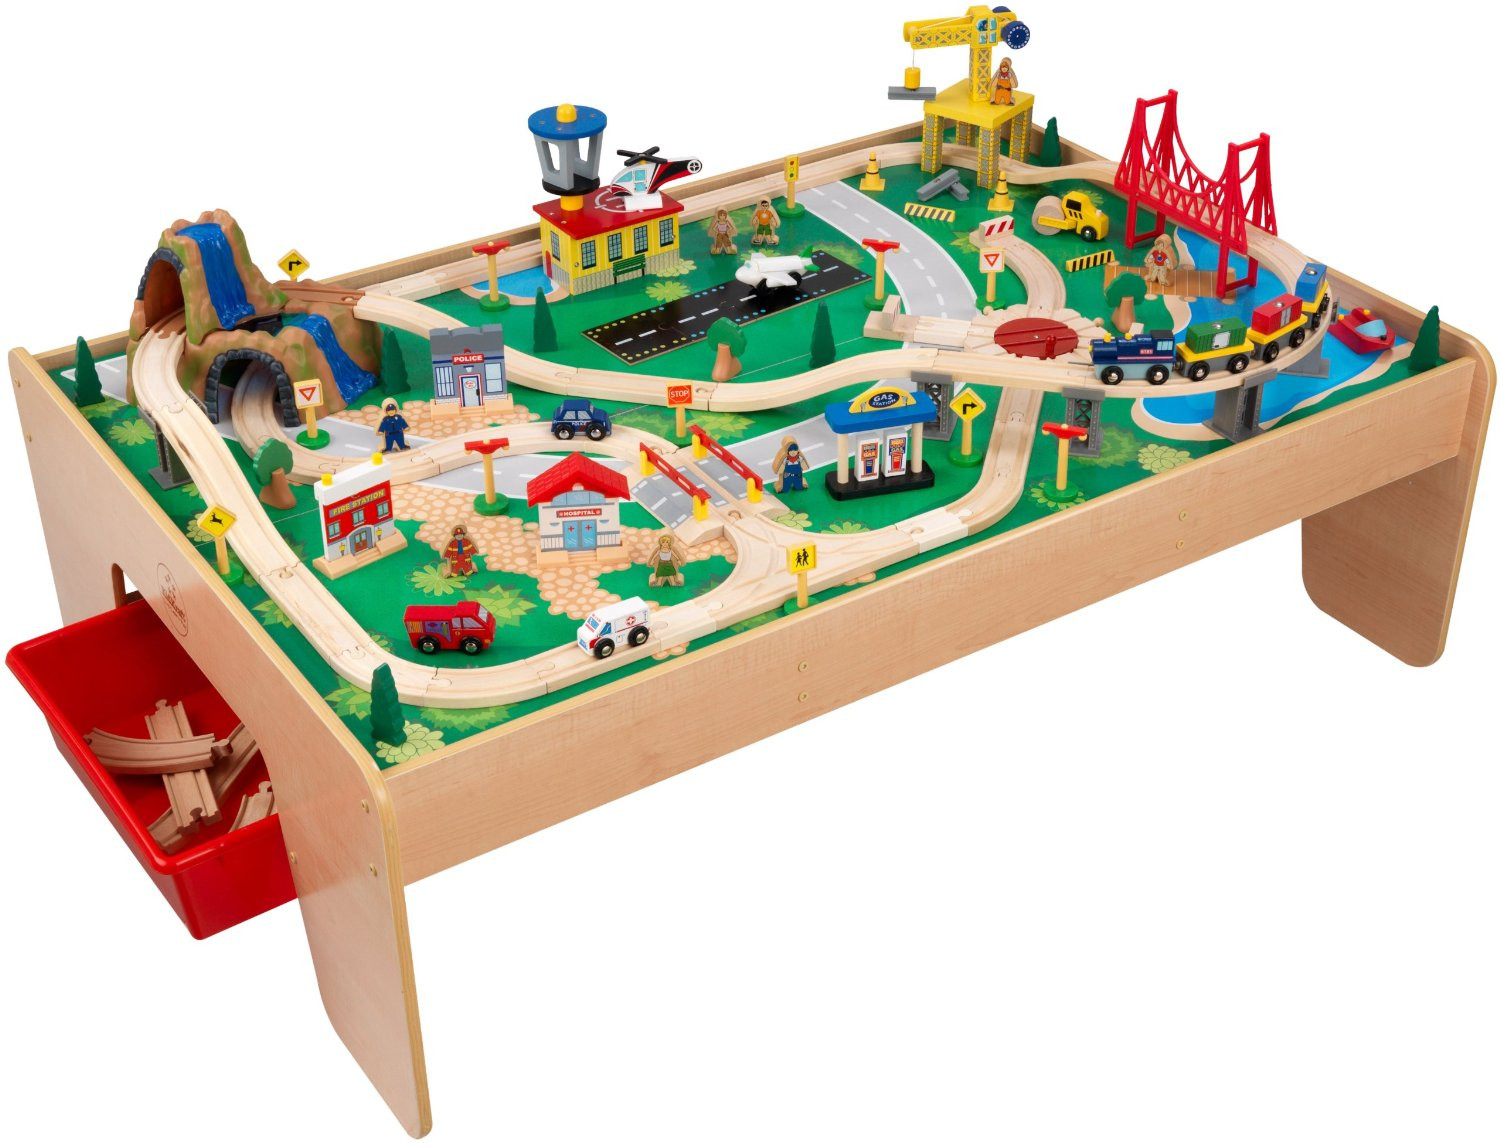 Kids Craft Train Table Set
 Best Train Sets For Kids What Are The Options